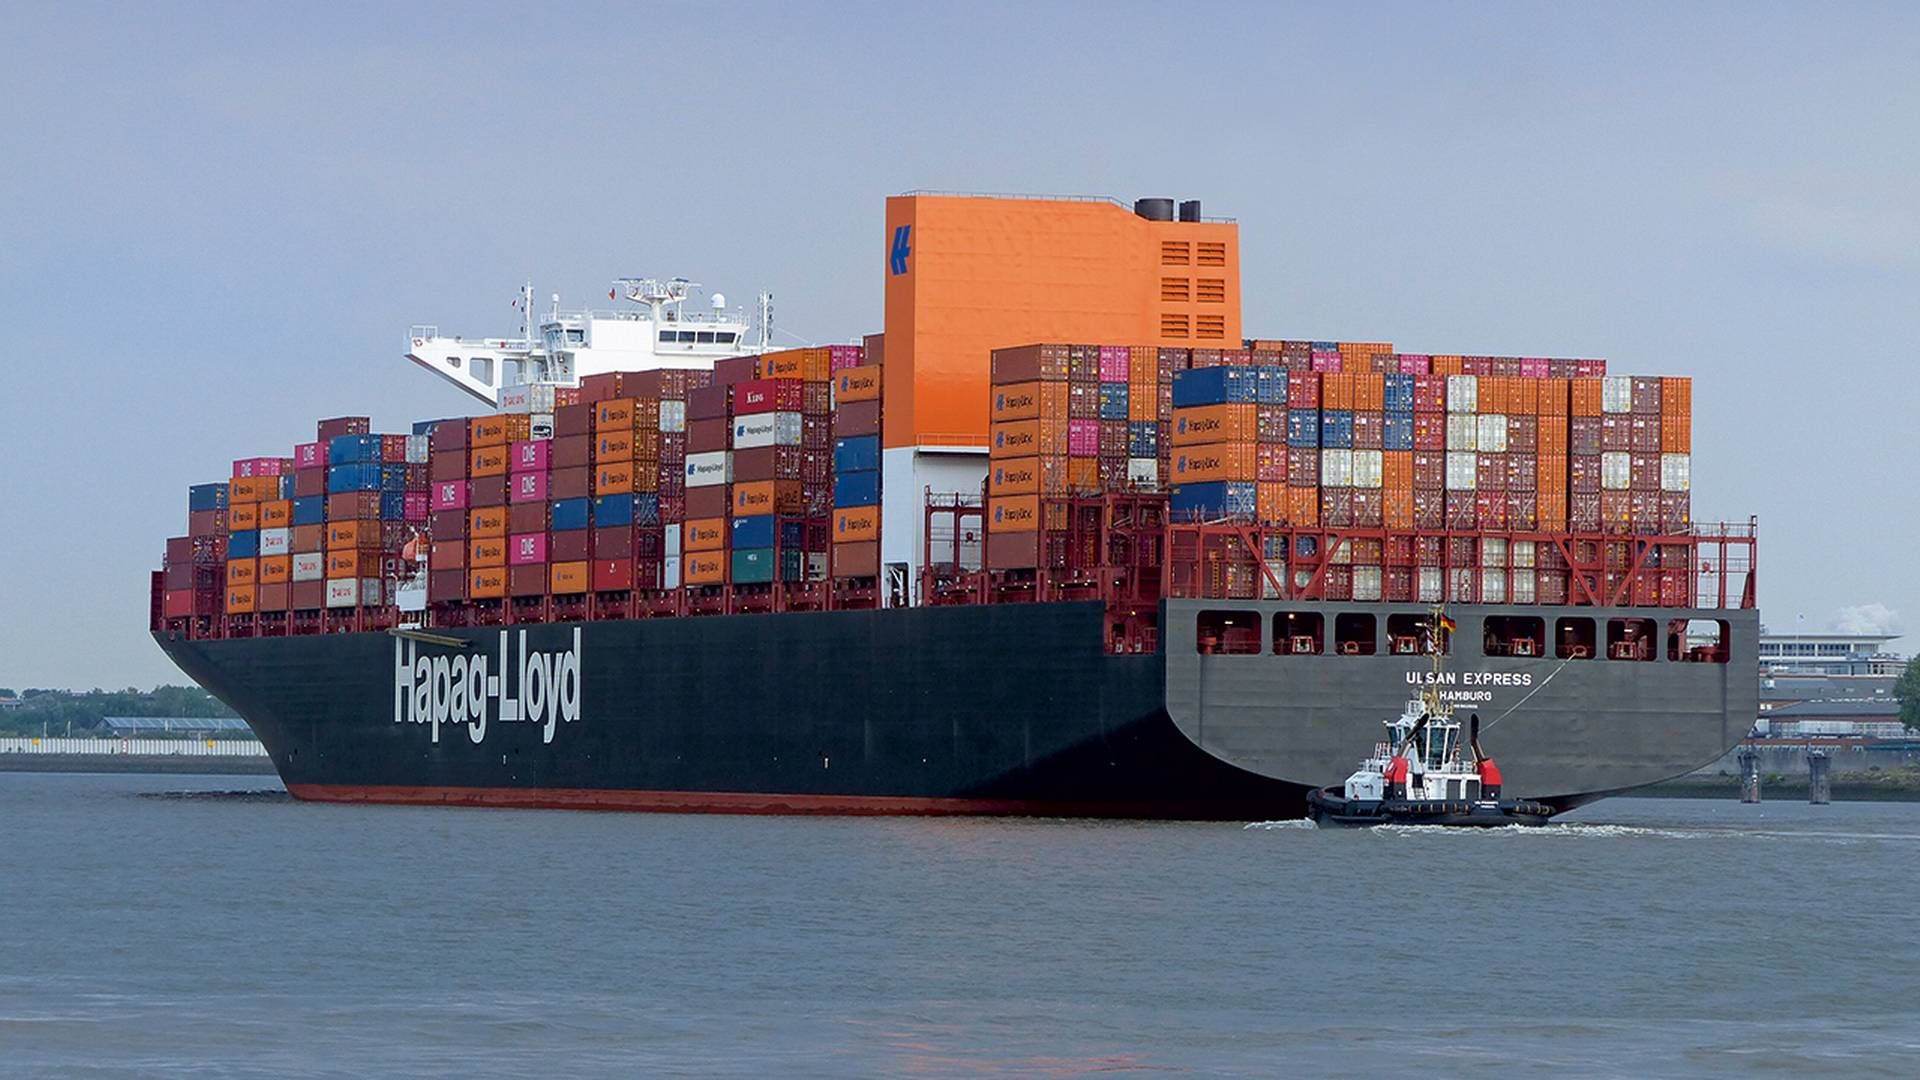 With a fleet of over 258 container ships, Hapag-Lloyd is one of the world's largest container shipping companies. | Photo: Hapag-lloyd